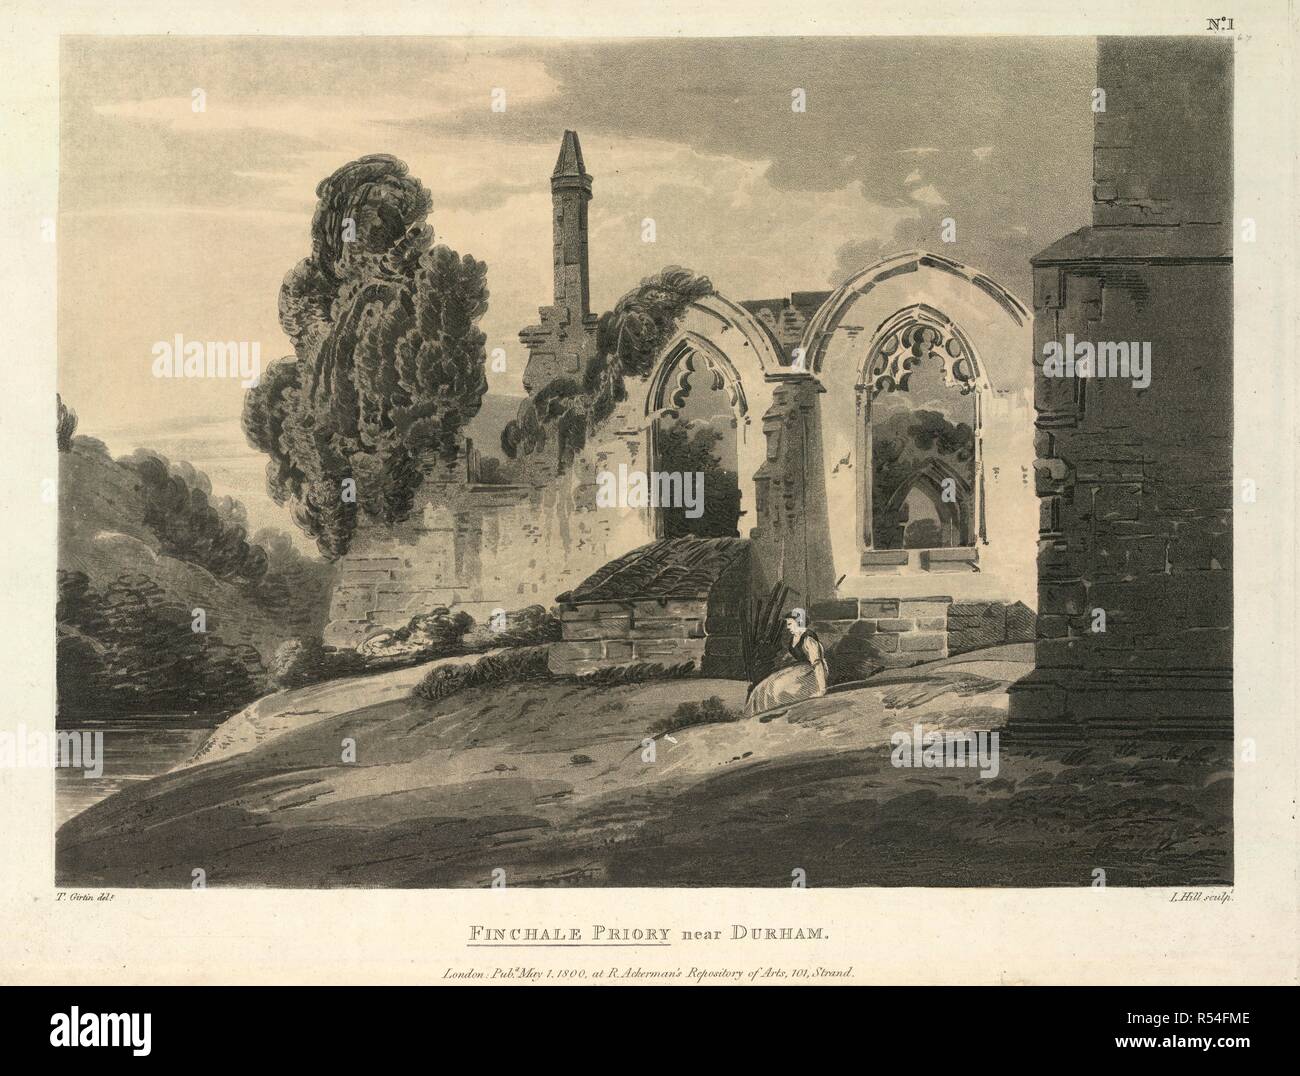 Finchale Priory. View of Finchale Priory, by Girtin, engraved by Hi. 1800. Finchale Priory near Durham.  Image taken from View of Finchale Priory, by Girtin, engraved by Hill.  Originally published/produced in 1800. . Source: Maps.K.Top.12.46.c,. Language: English. Stock Photo